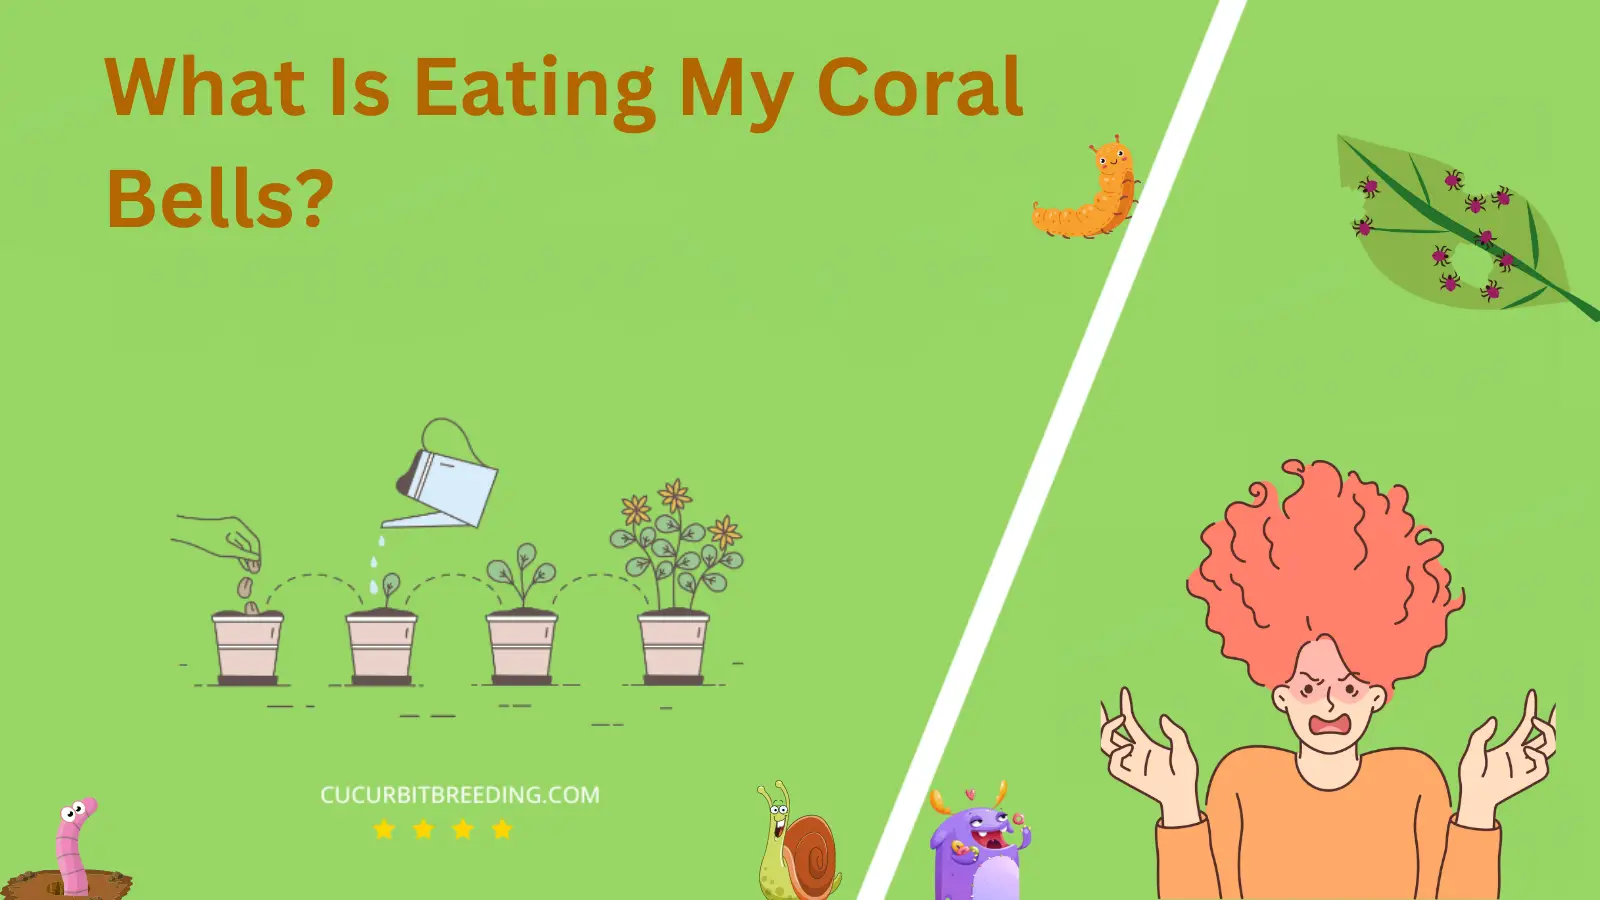 What Is Eating My Coral Bells